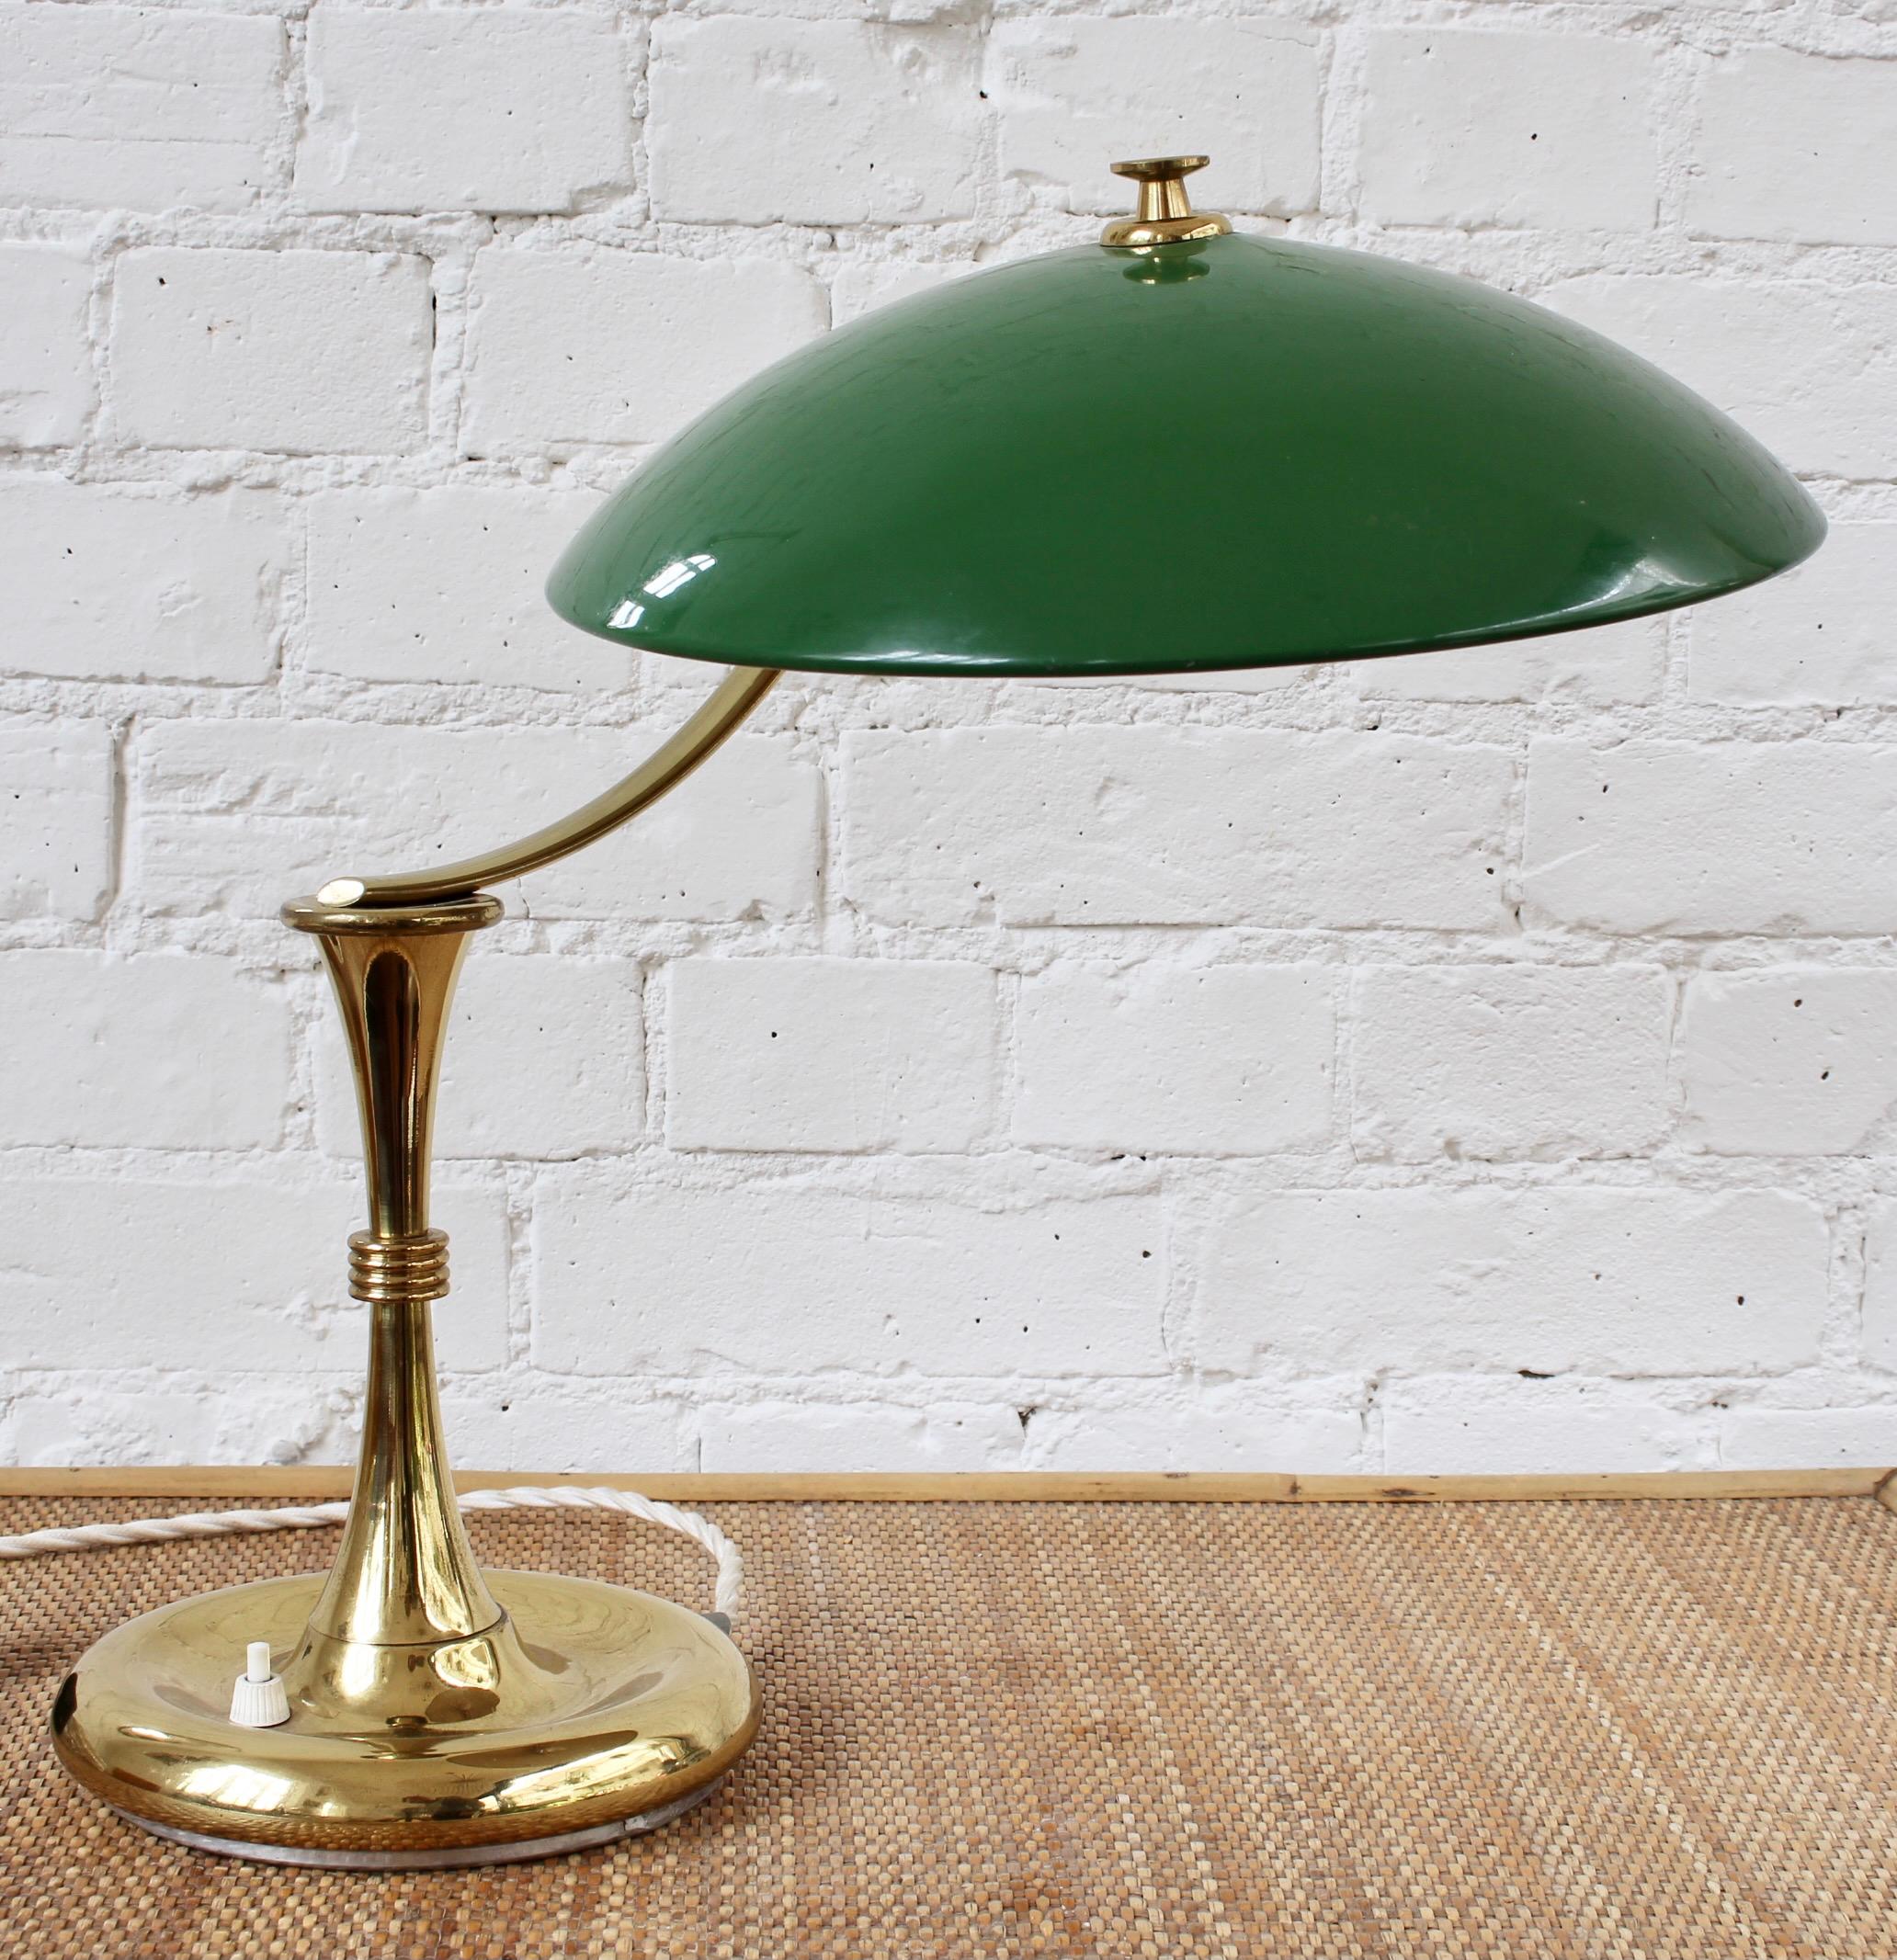 Italian Mid-Century Brass-Covered Desk Lamp with Green Shade 'circa 1950s' For Sale 2